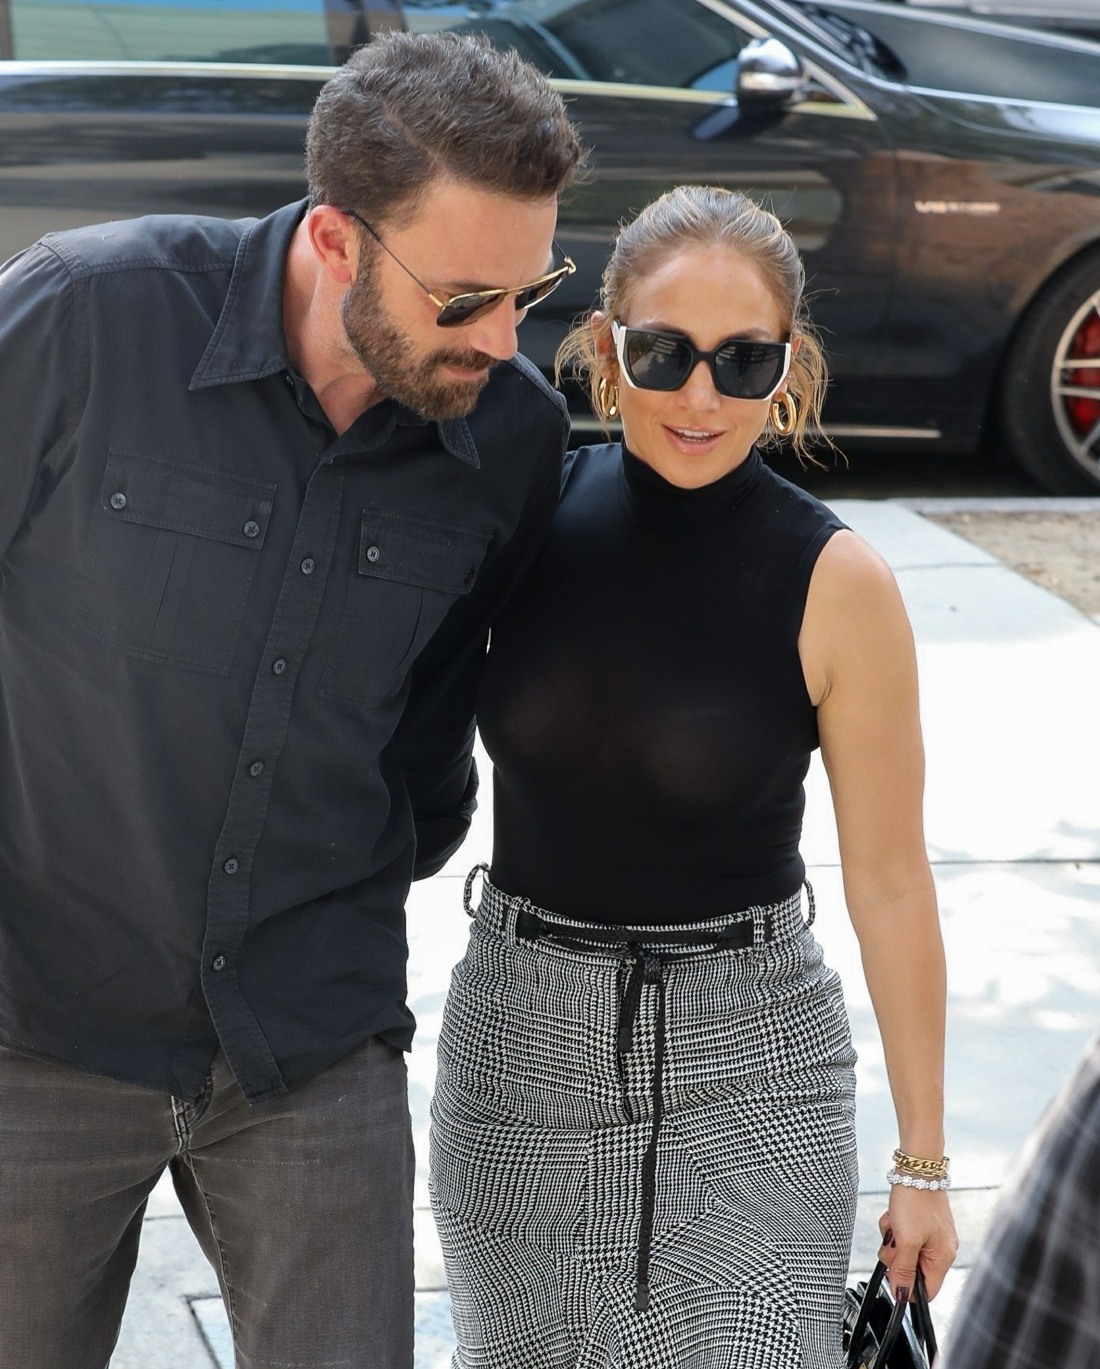 Ben Affleck and Jennifer Lopez wear matching outfits shopping in LA